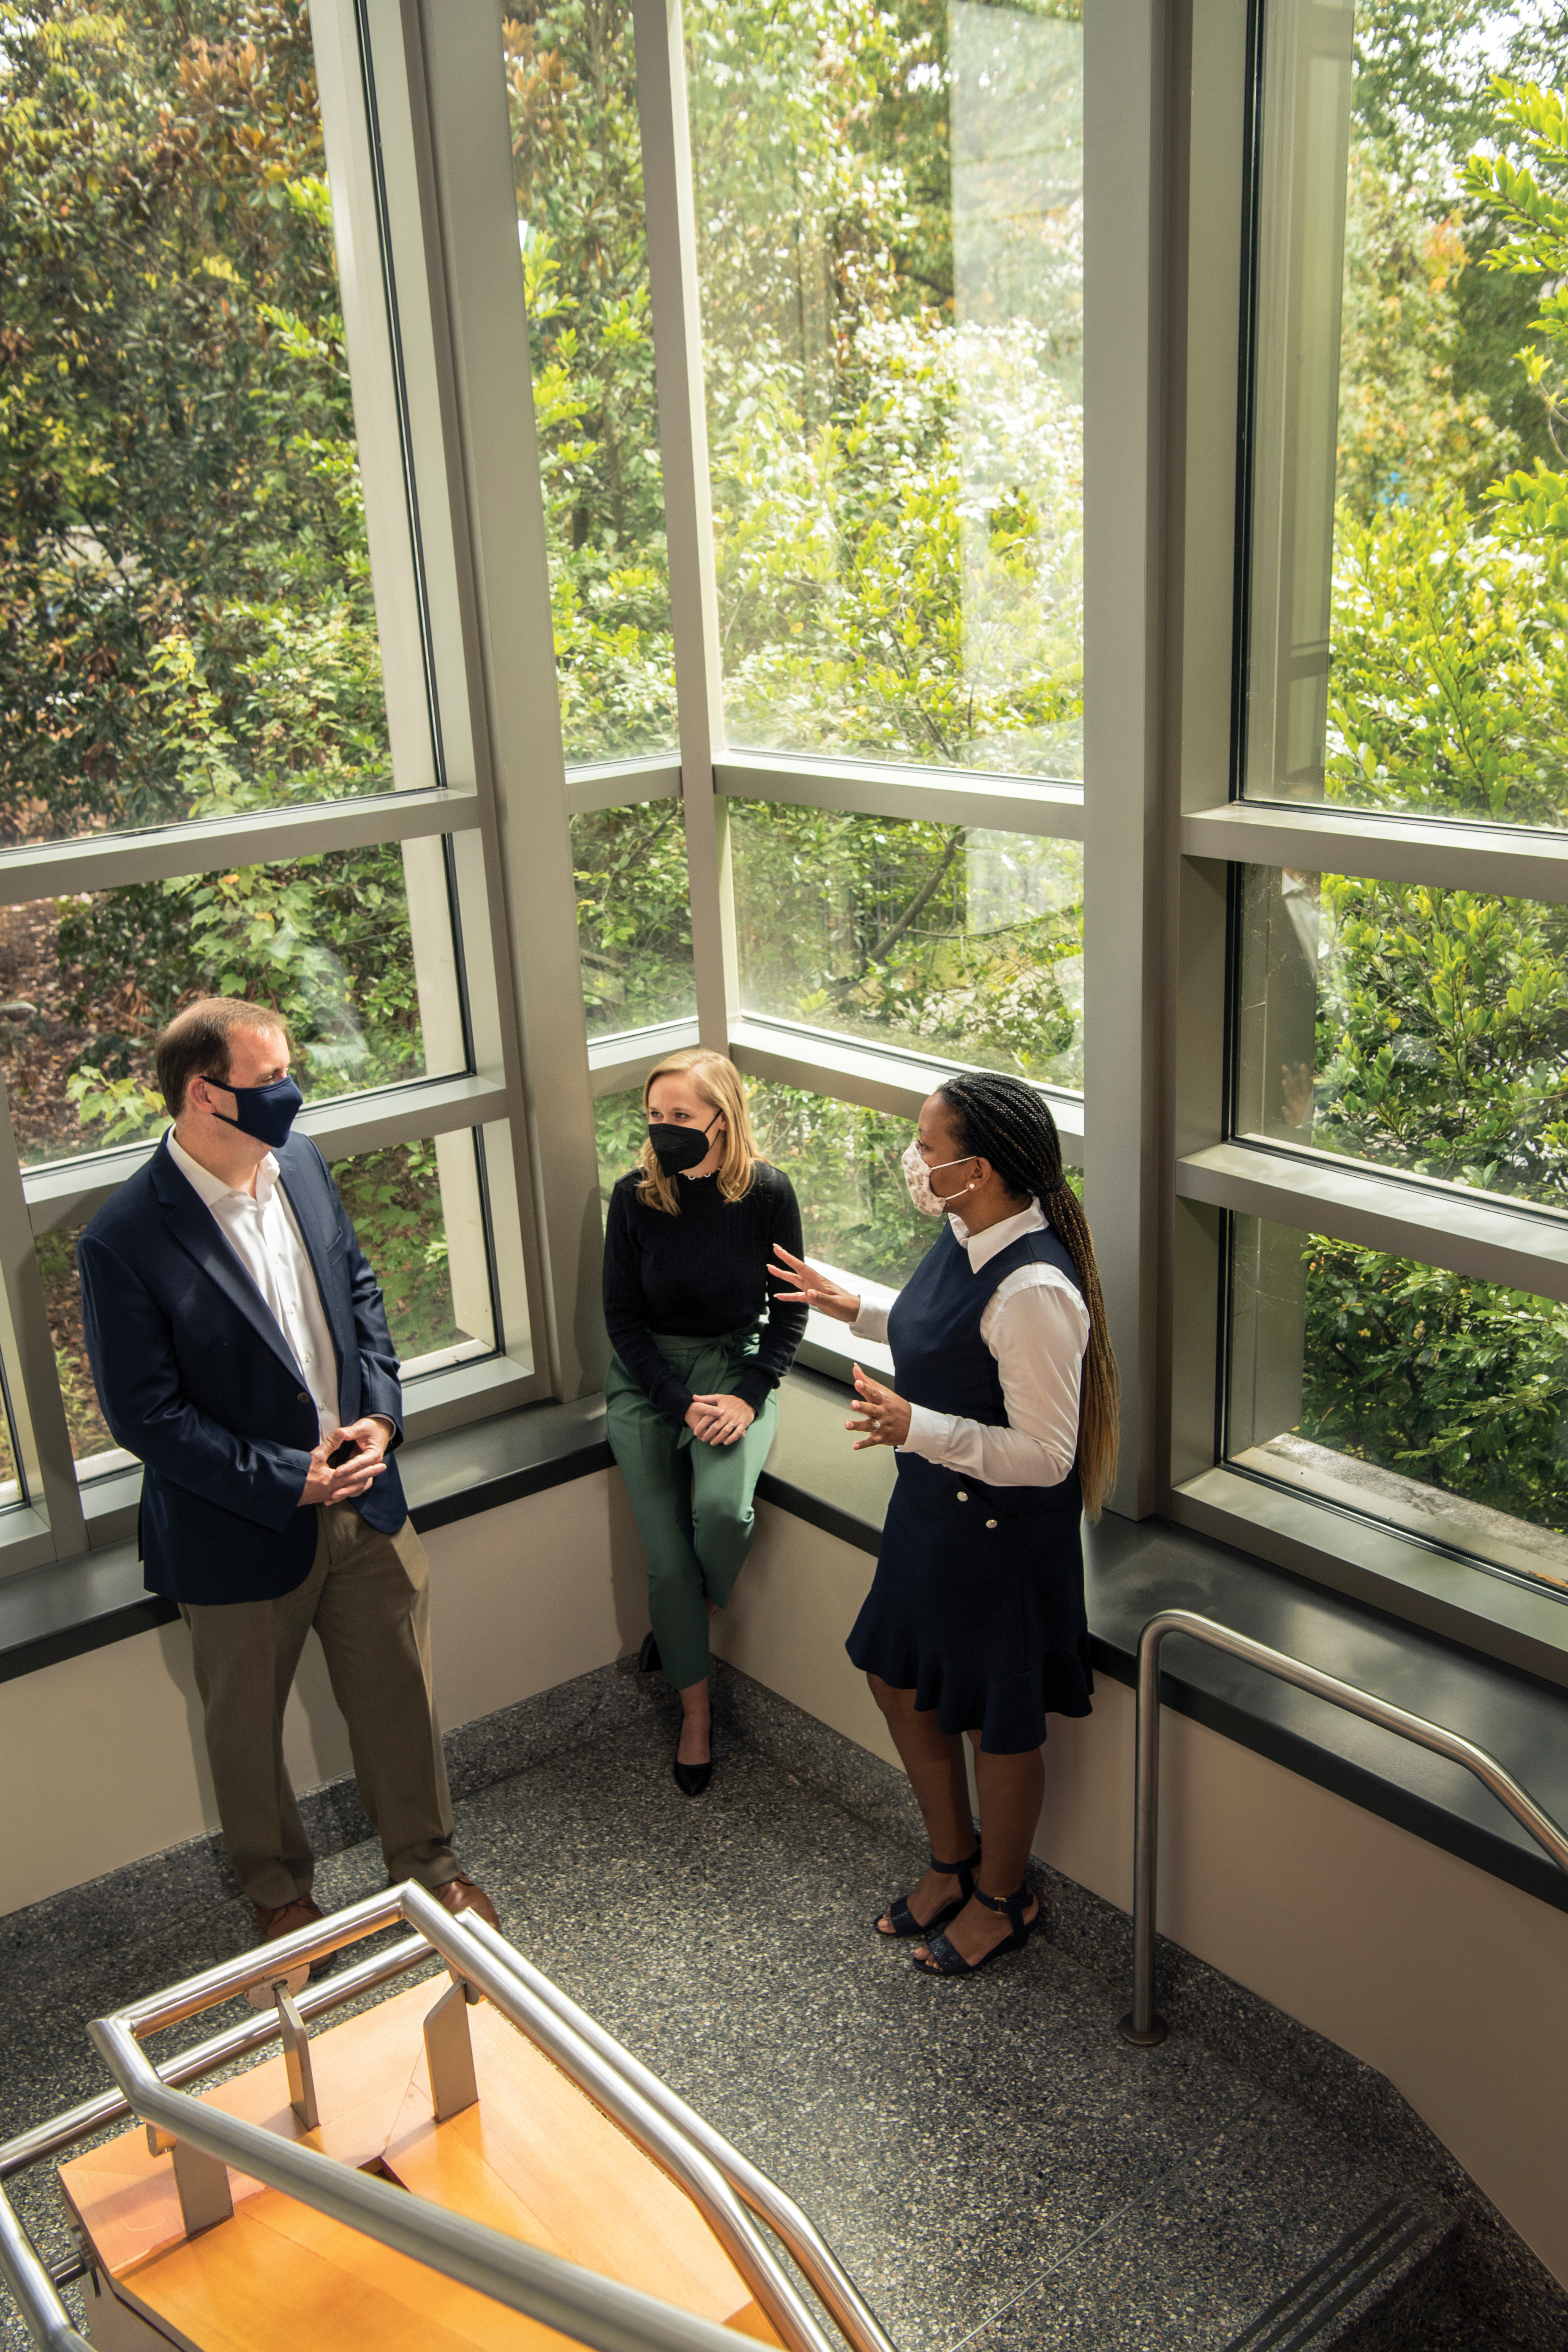 Left to right: Cliff Teague,  executive administrator of HR; Rachel Sedlack-Prittie, senior director of strategic initiatives and innovation; and Natalie Fields, director of faculty advancement and inclusion, in the School of Medicine.  